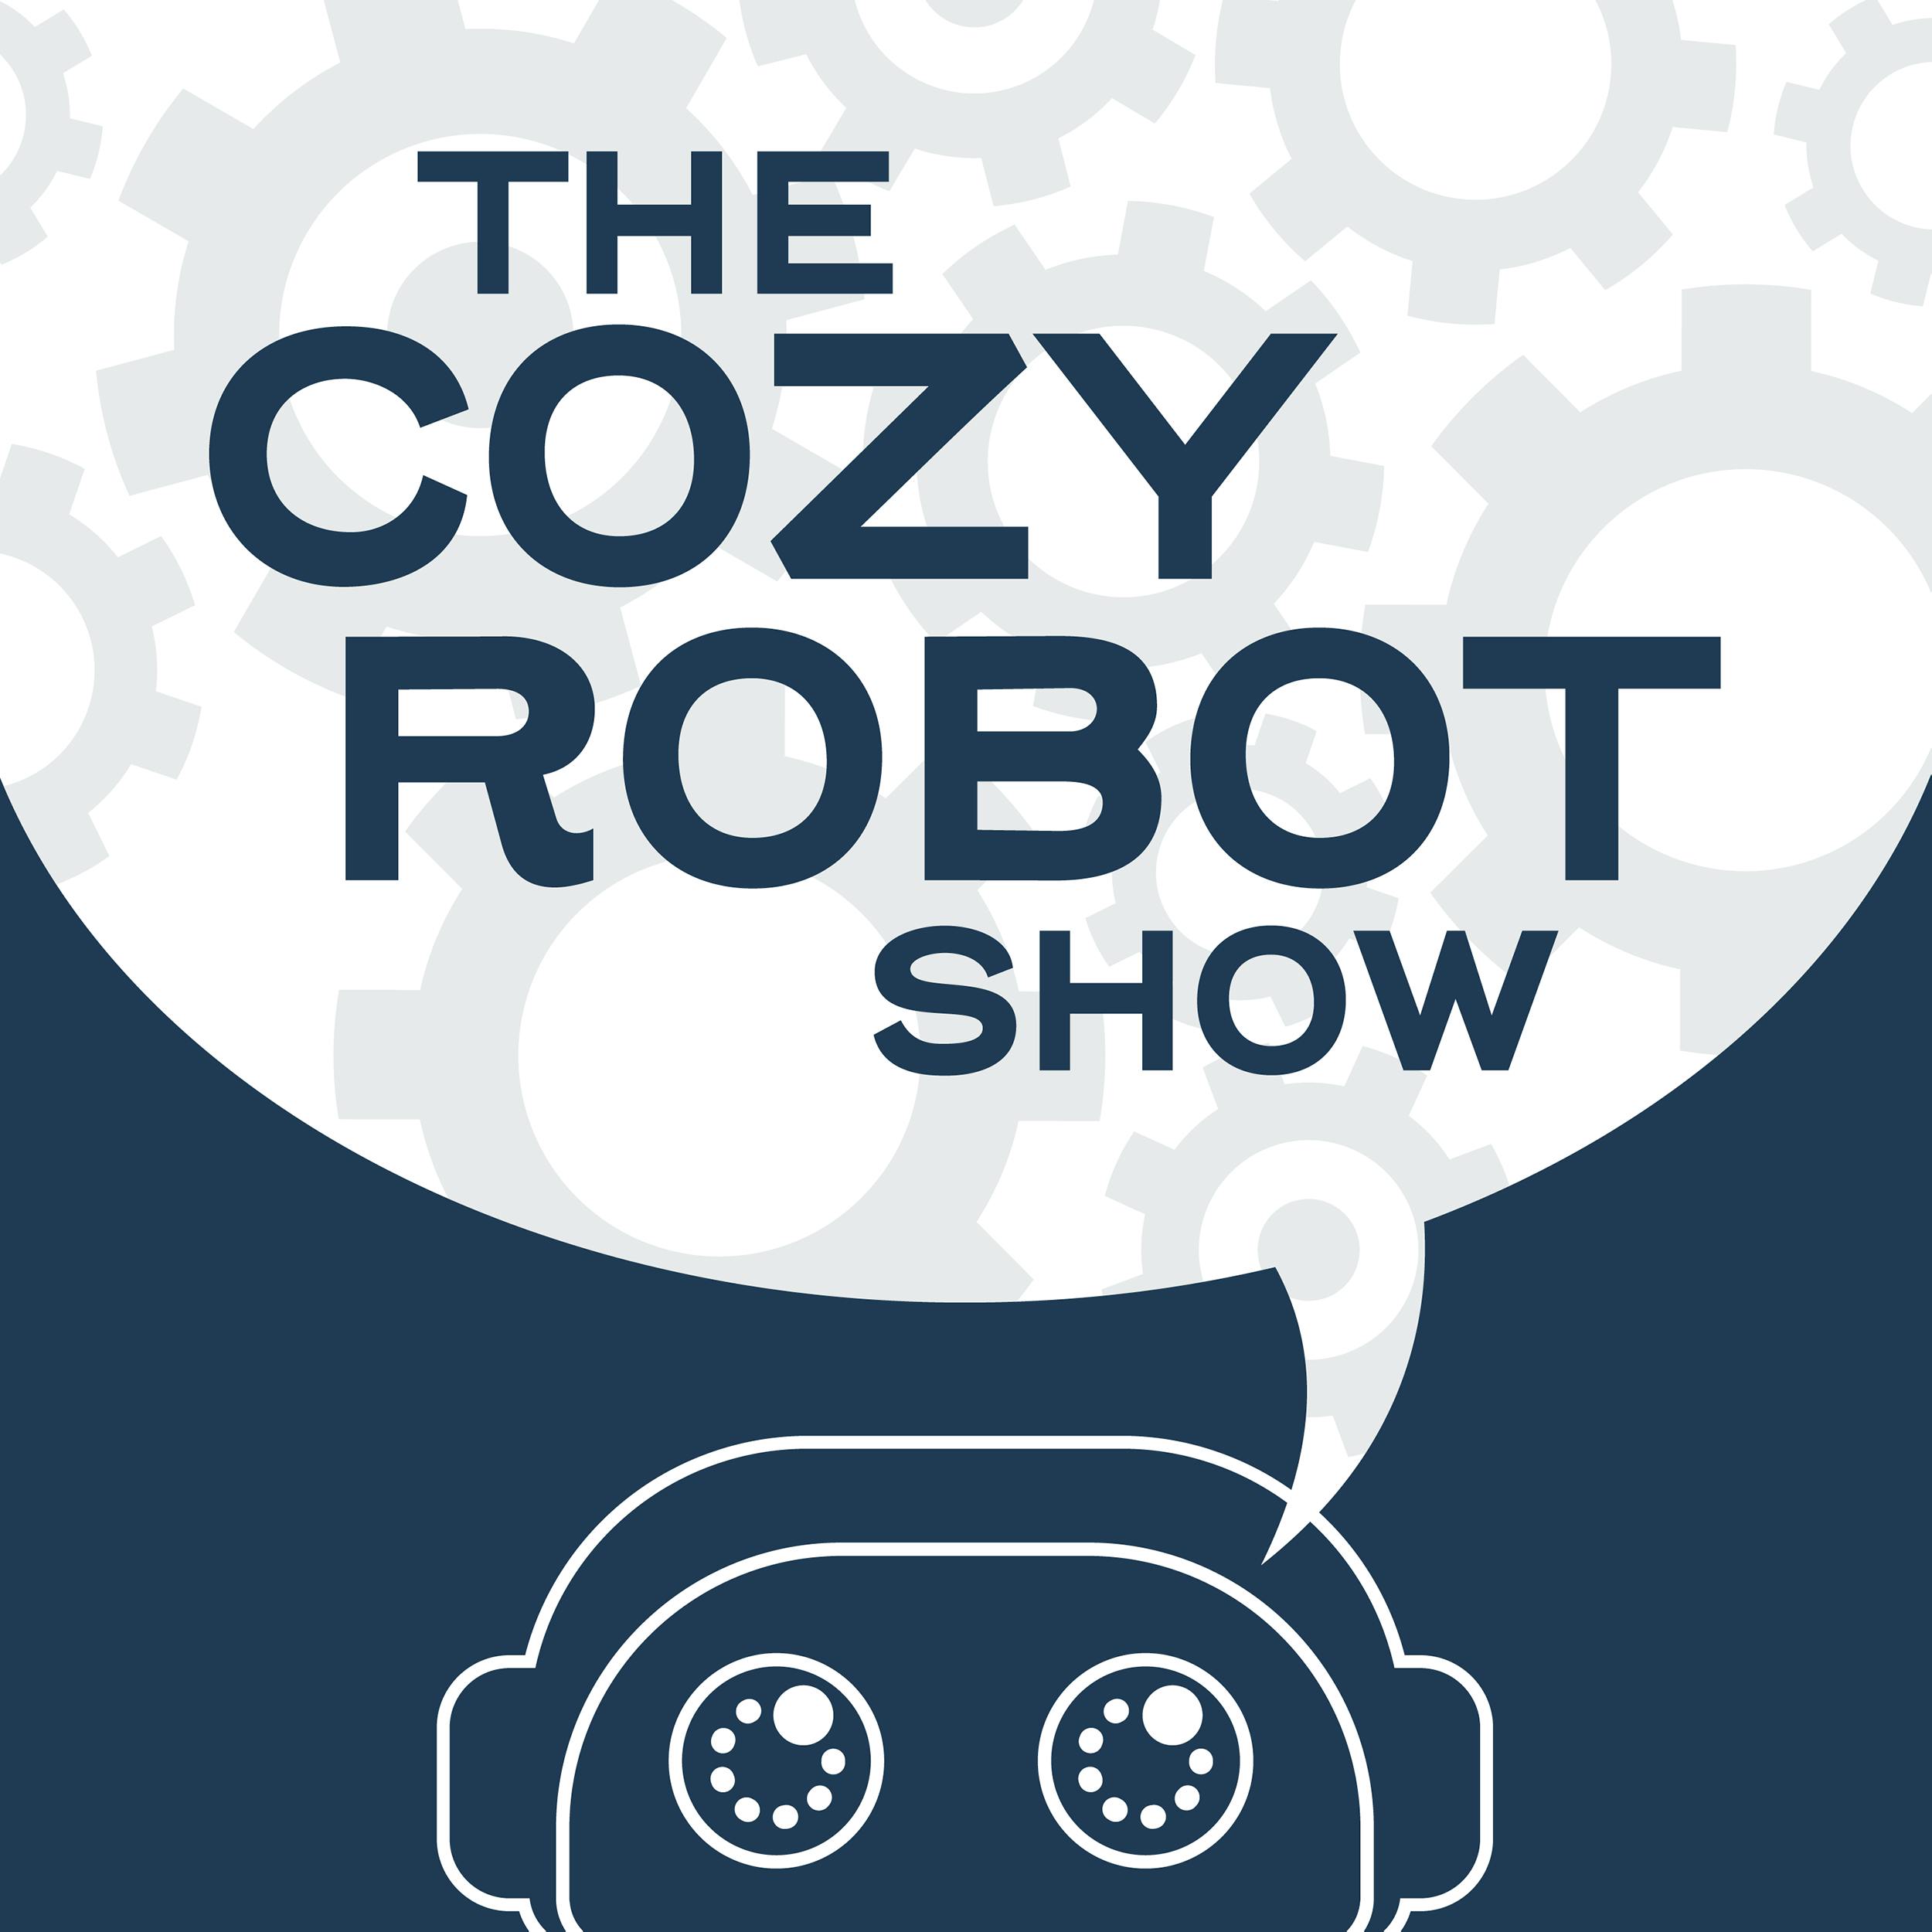 Cozy Robot Show: Was Santa Claus Real? The History of Old Saint Nick